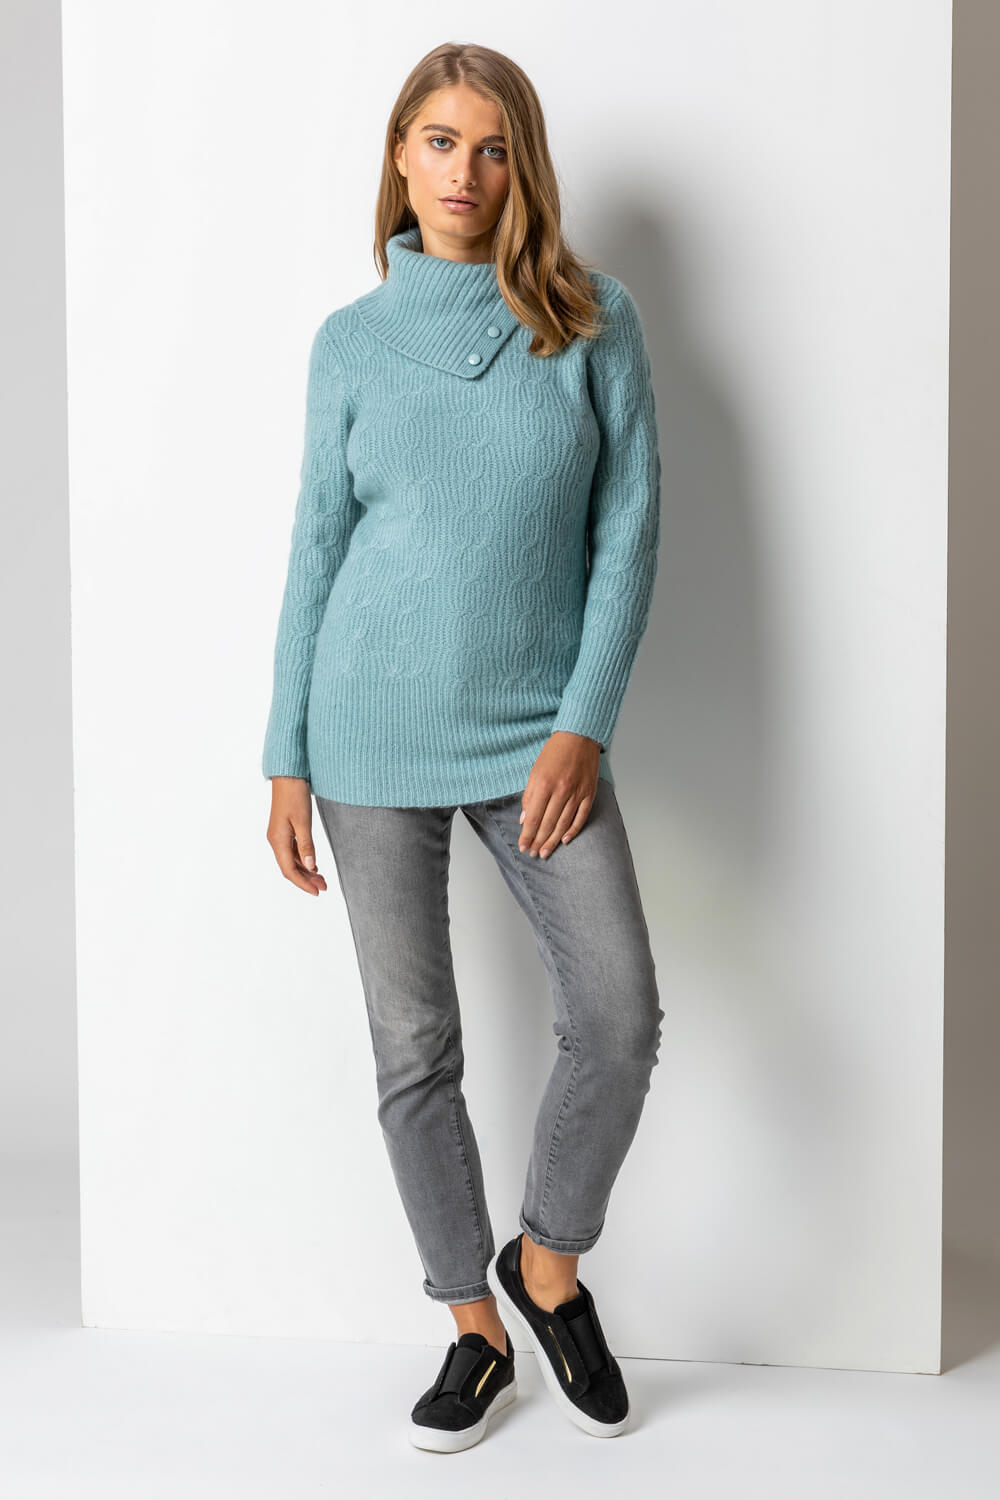 Steel Blue Cable Knit High Neck Jumper, Image 3 of 5